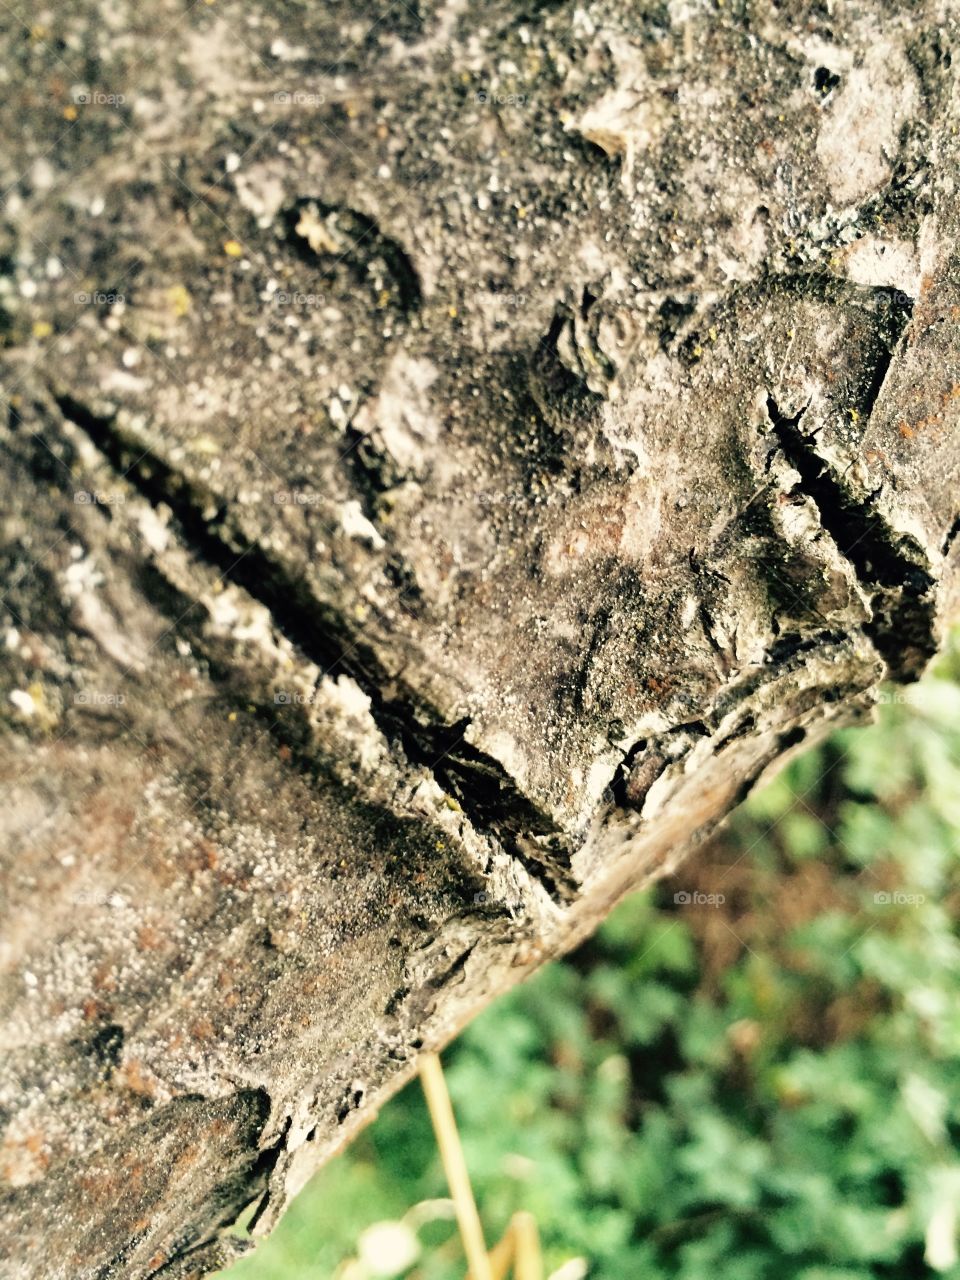 scars on a tree in my grandparents backyard.